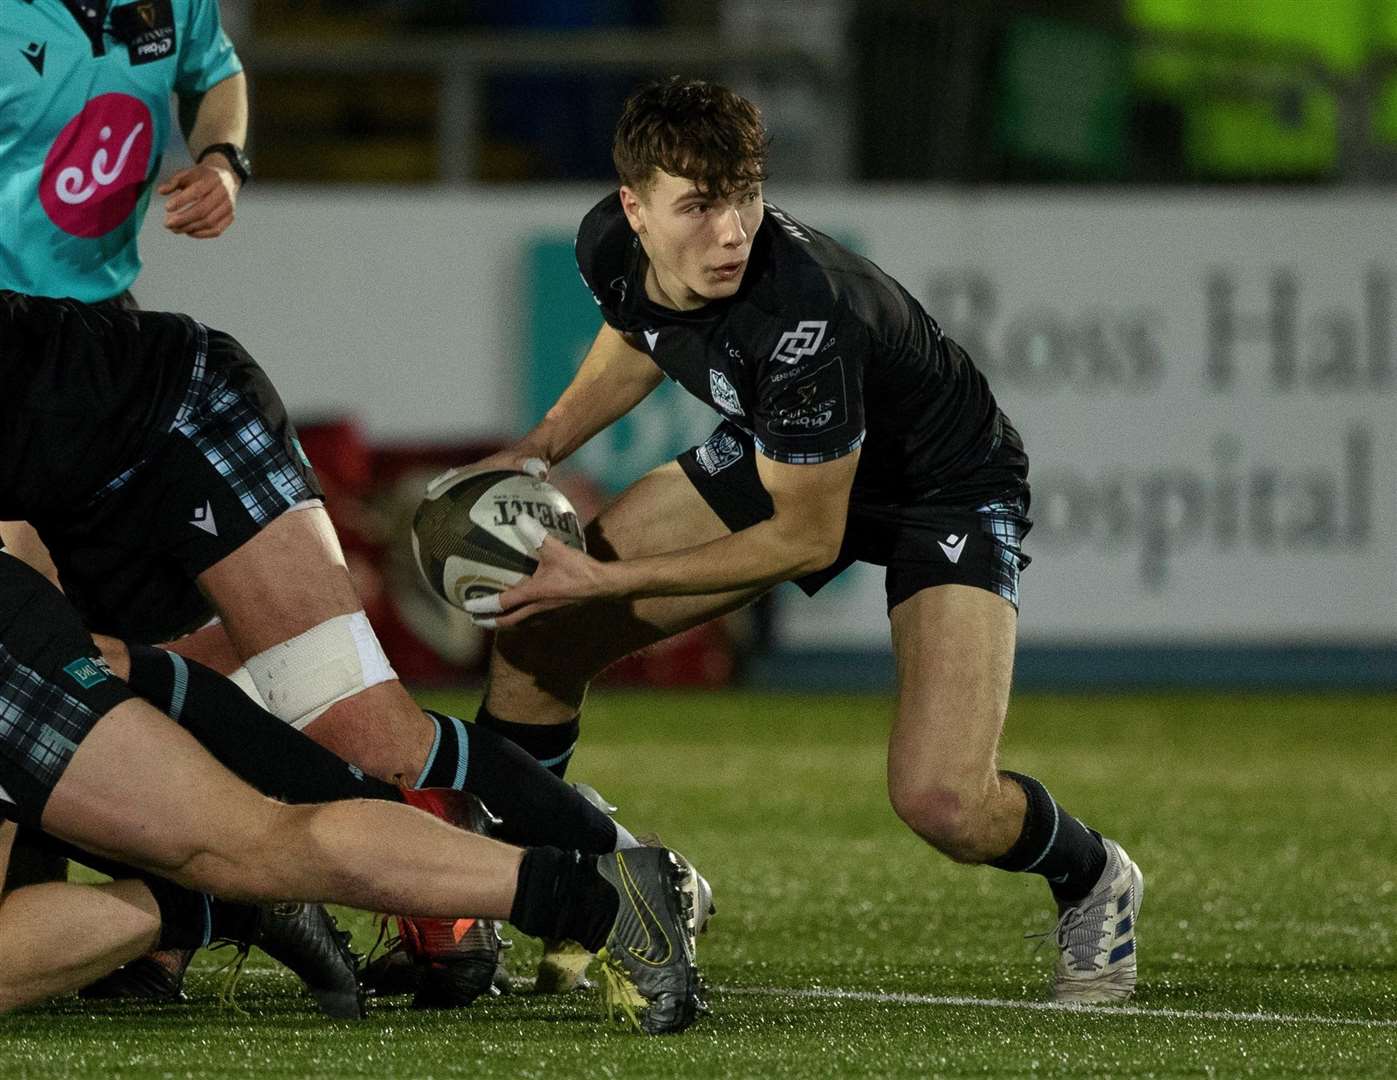 Glasgow Warriors' Inverness teenager Jamie Dobie made his senior Scotland debut in the win over Tonga. Picture: SNS Group/SRU